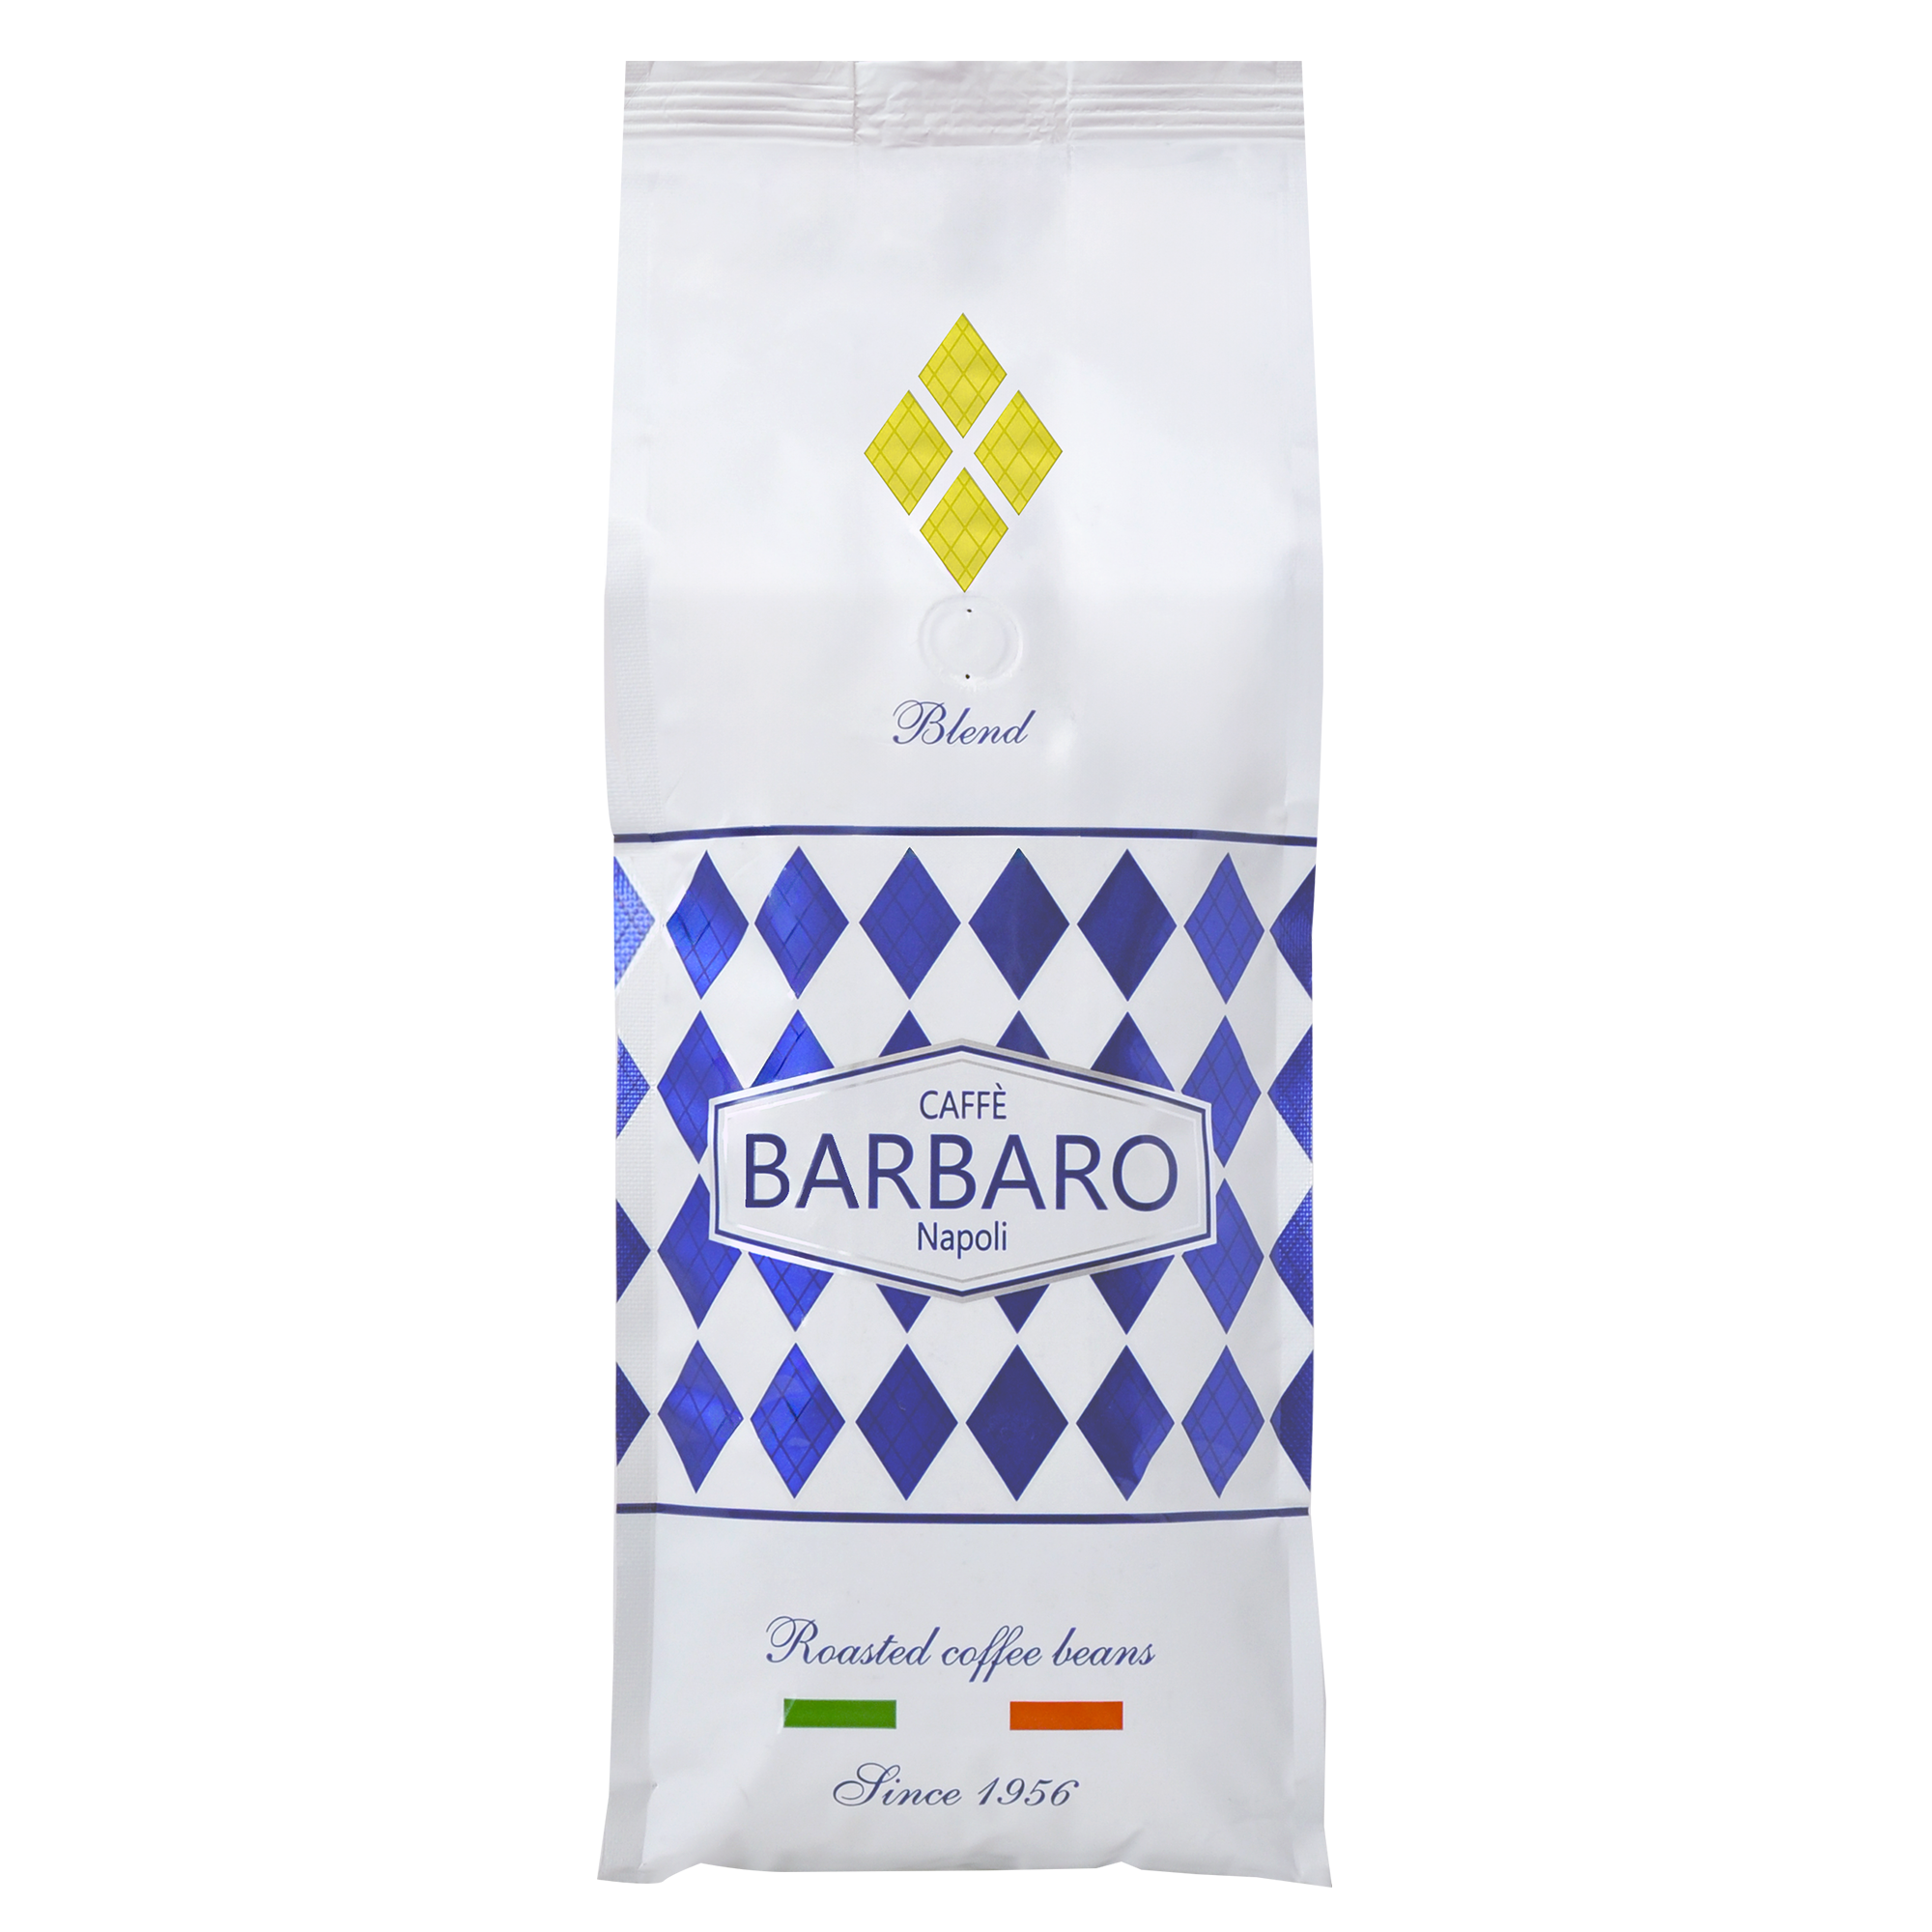 Barbaro Gold Blend Roasted Espresso Coffee Beans - 2.2lbs/6pk